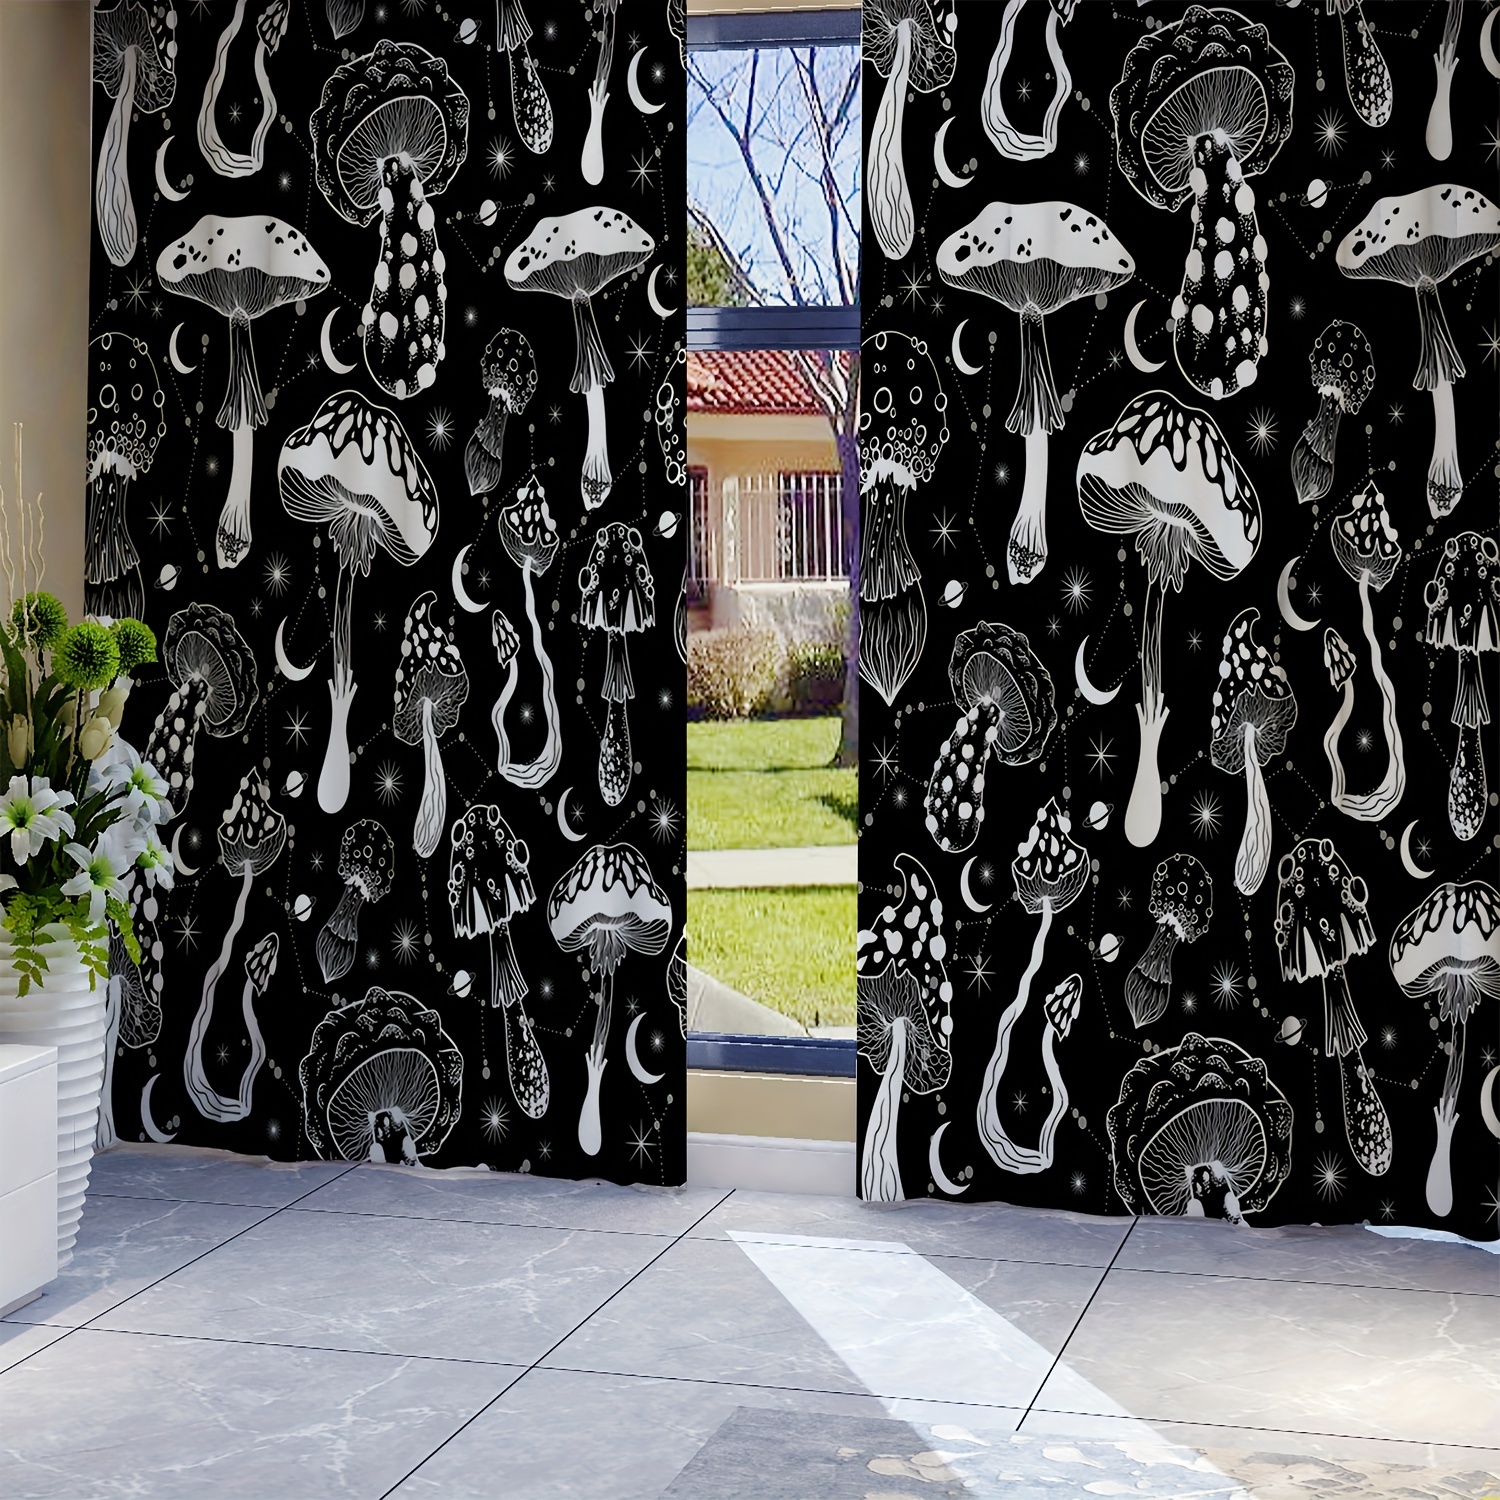 

Vintage Mushroom And Moon Print Light-filtering Curtain Panels, Set Of 2, Rod Pocket Window Drapes For Bedroom And Living Room Decor, Machine Washable Polyester Fabric, Arts Themed Window Treatment